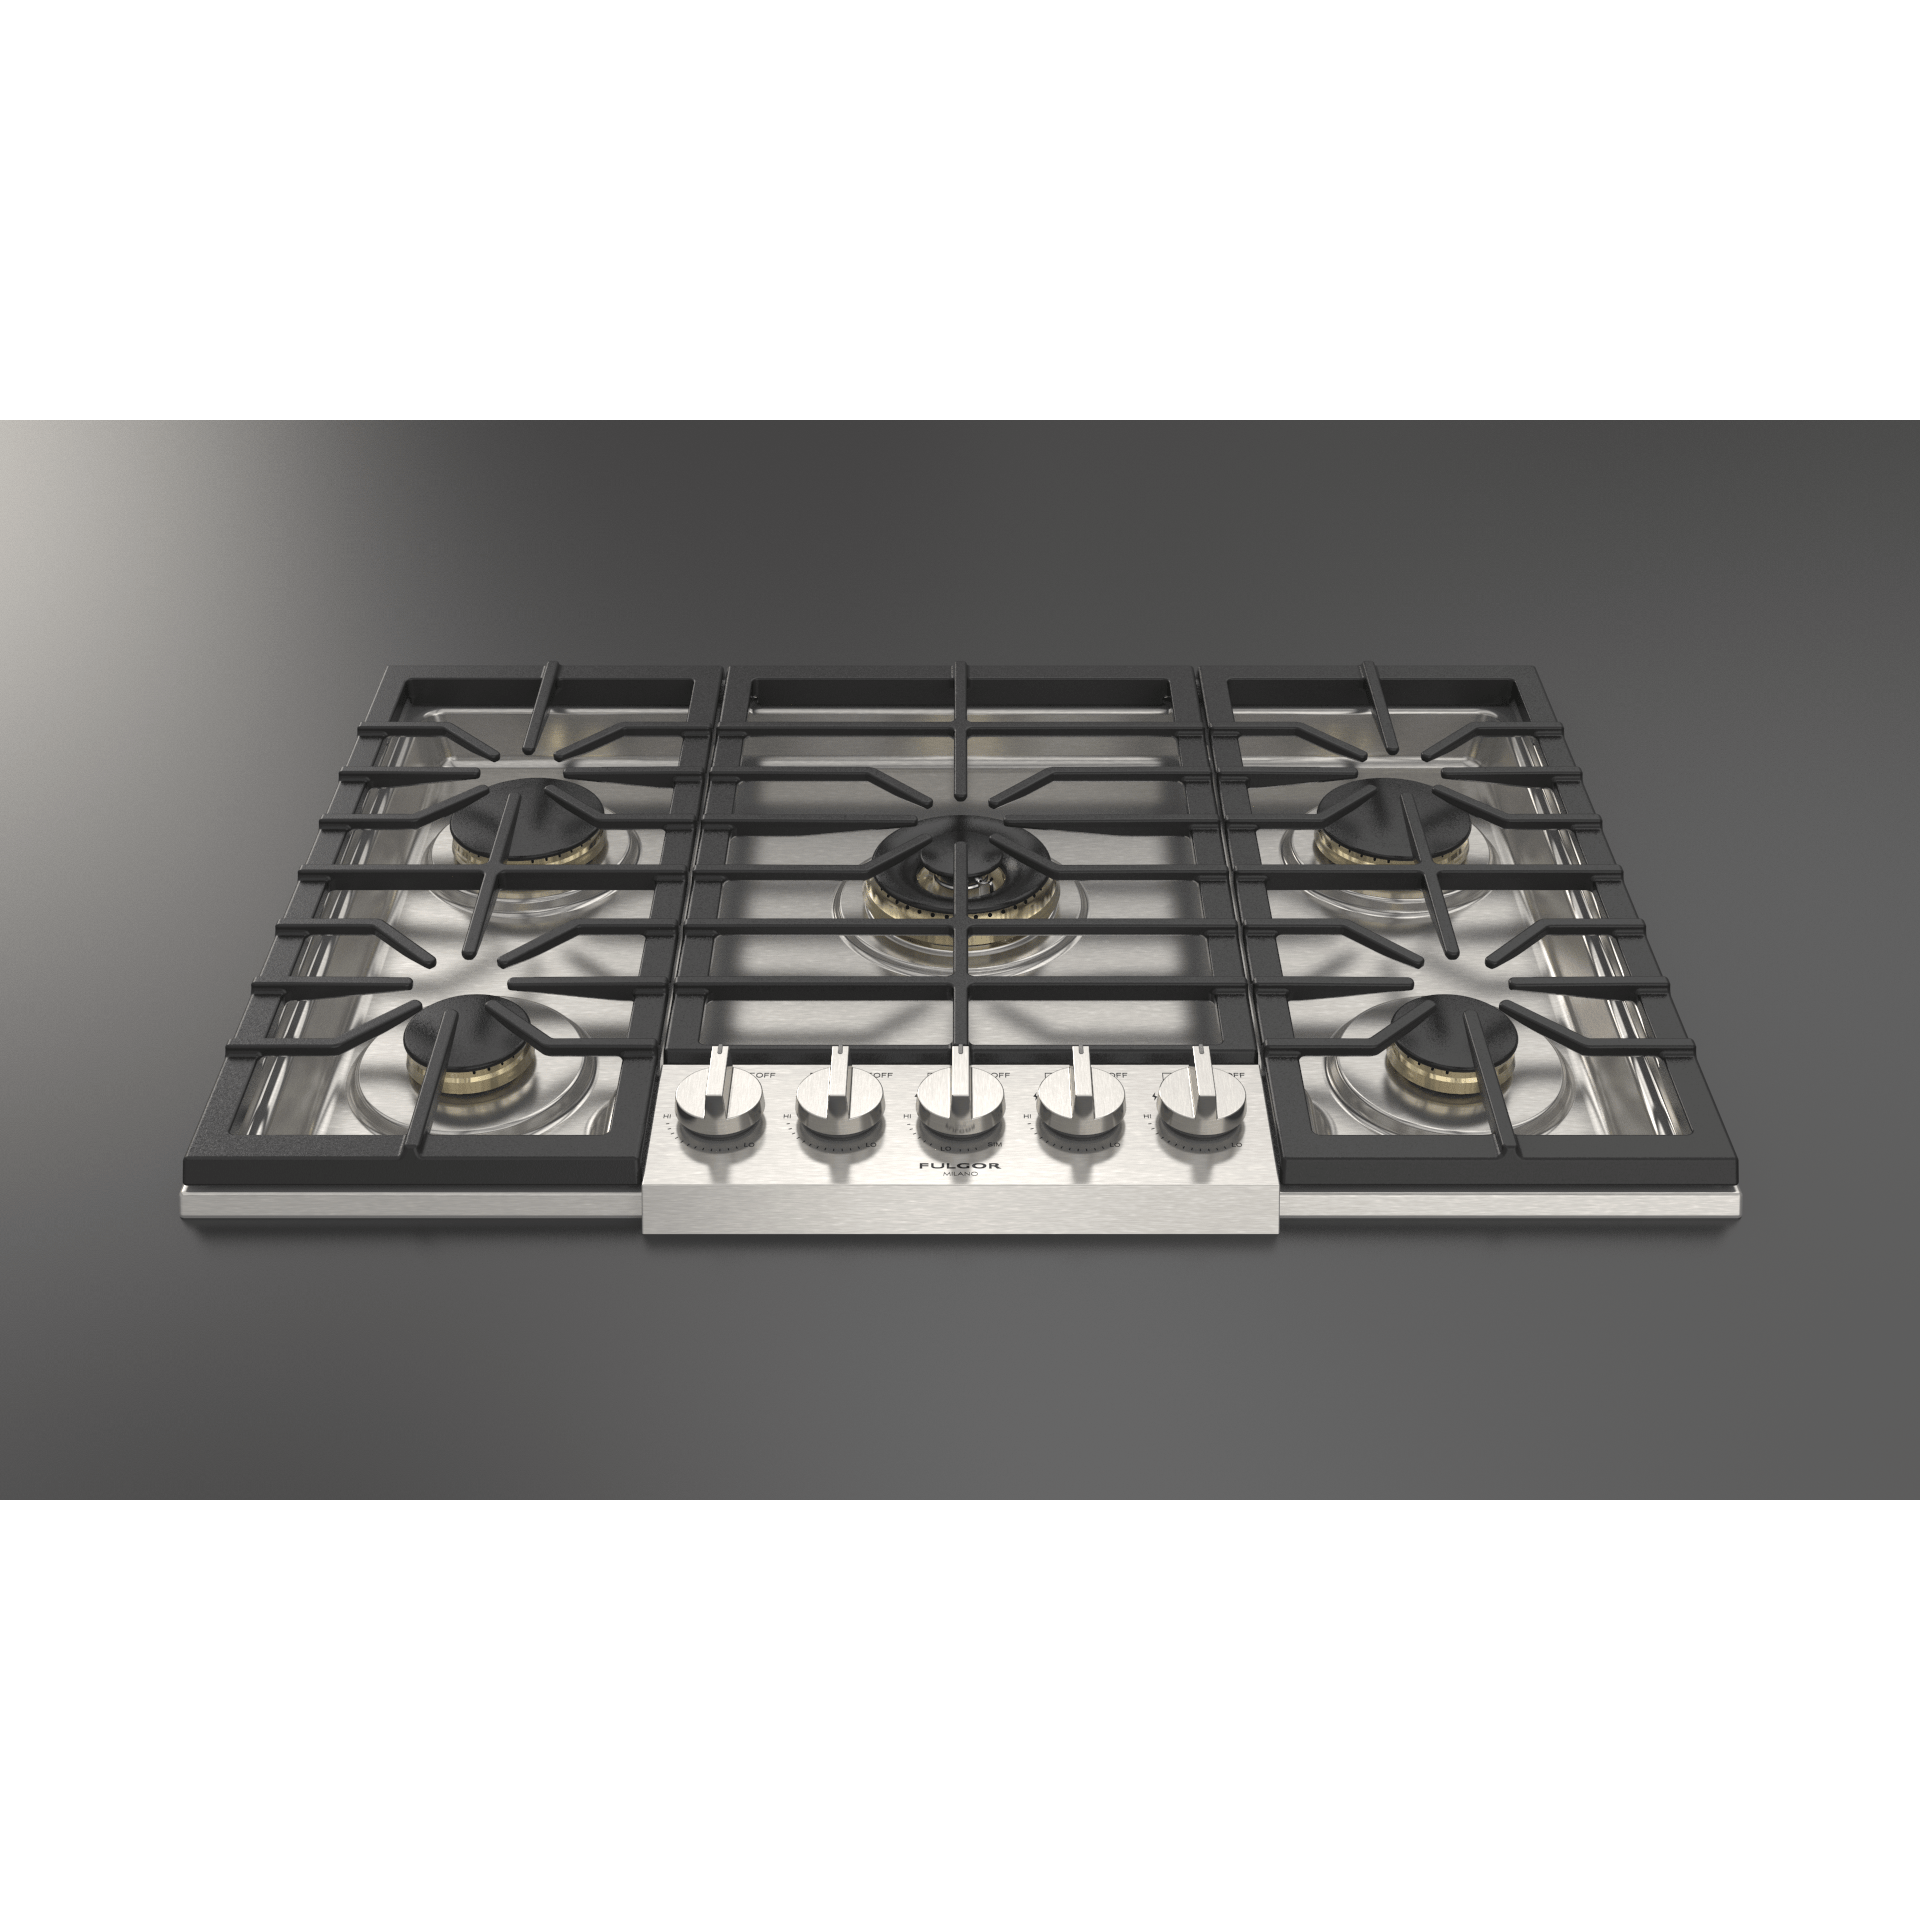 Fulgor Milano 30" Pro-Style Natural Gas Cooktop with 1 Center Dual Burner - F6PGK305S1 Cooktops F6PGK305S1 Luxury Appliances Direct